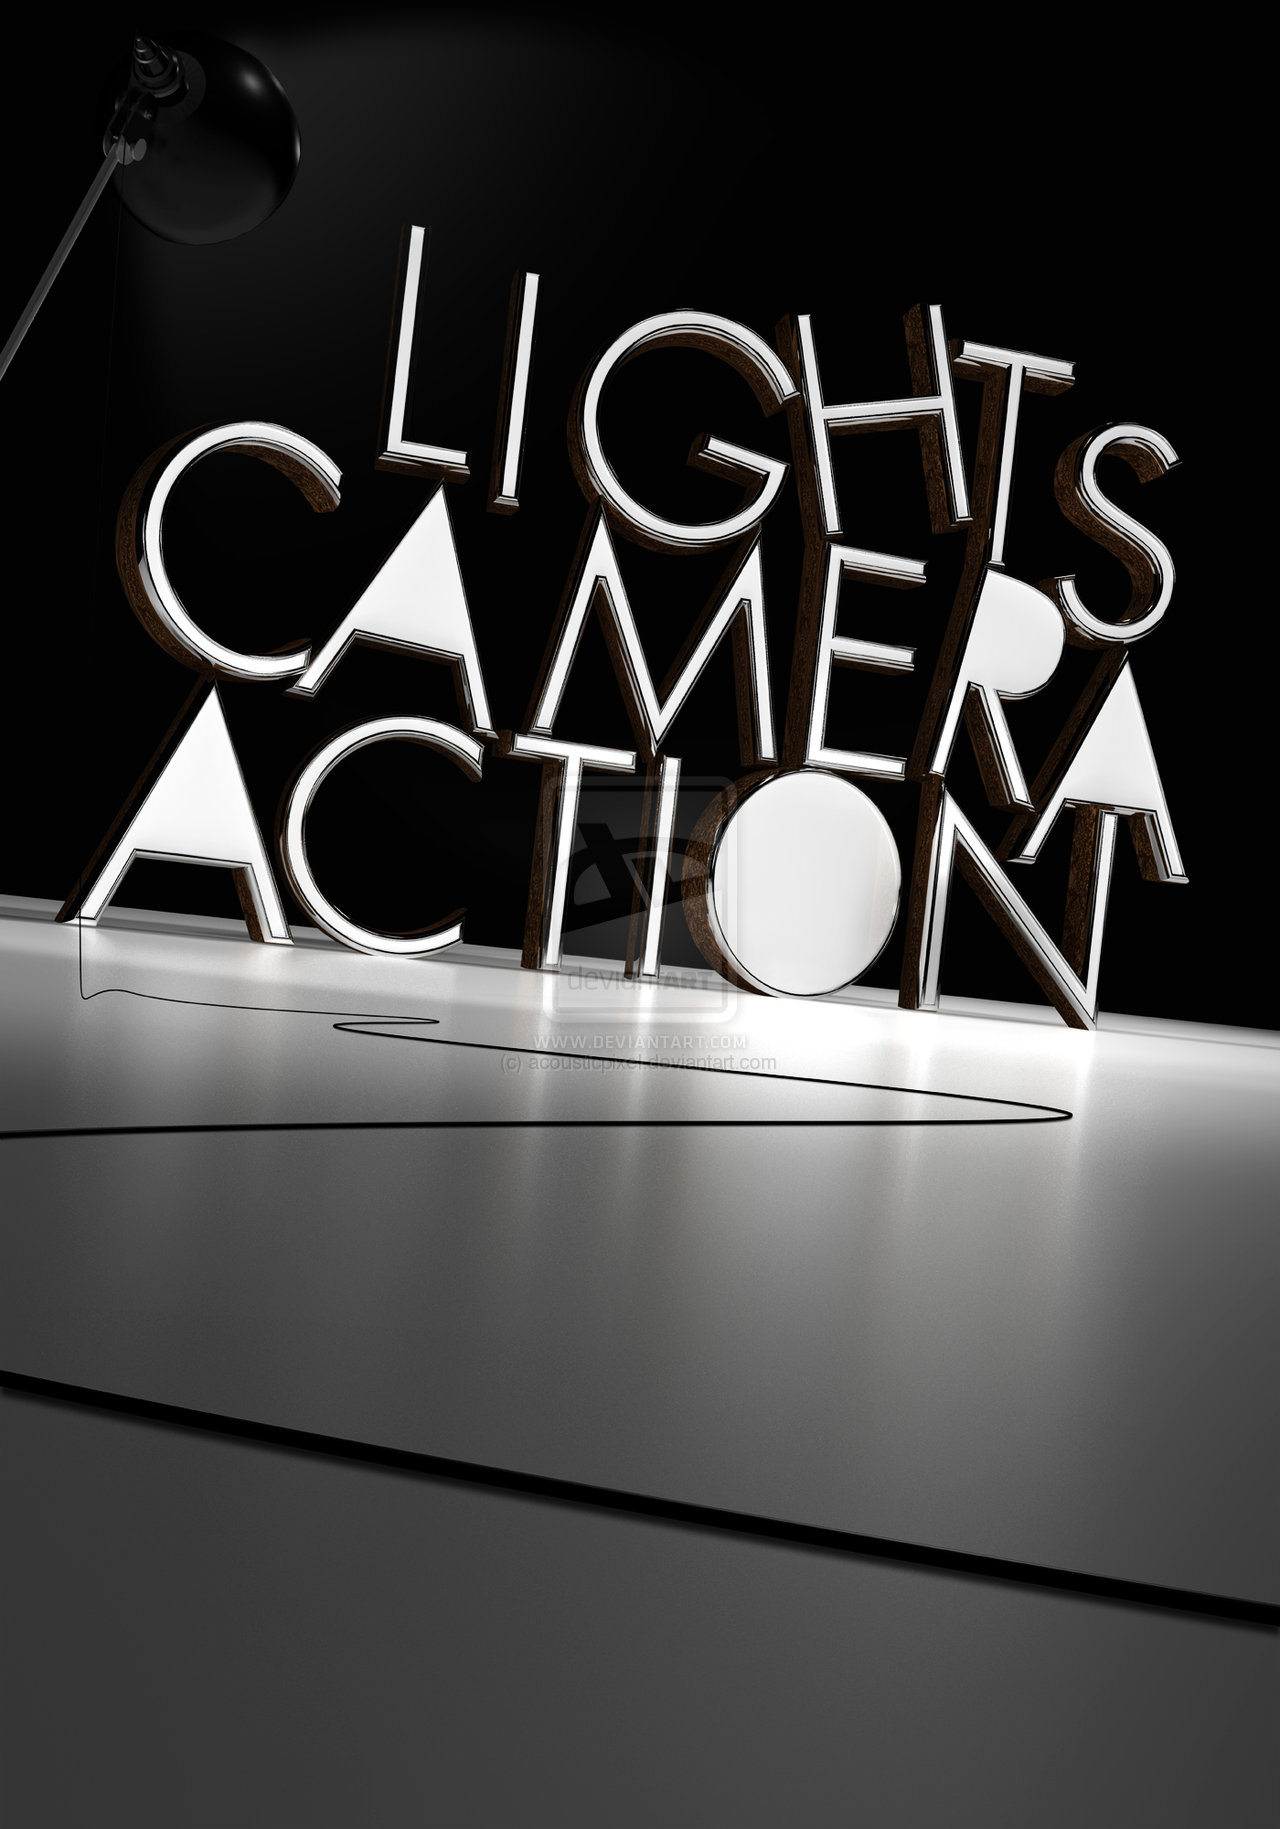 lights_camera_action_by_acousticpixel-d324px2